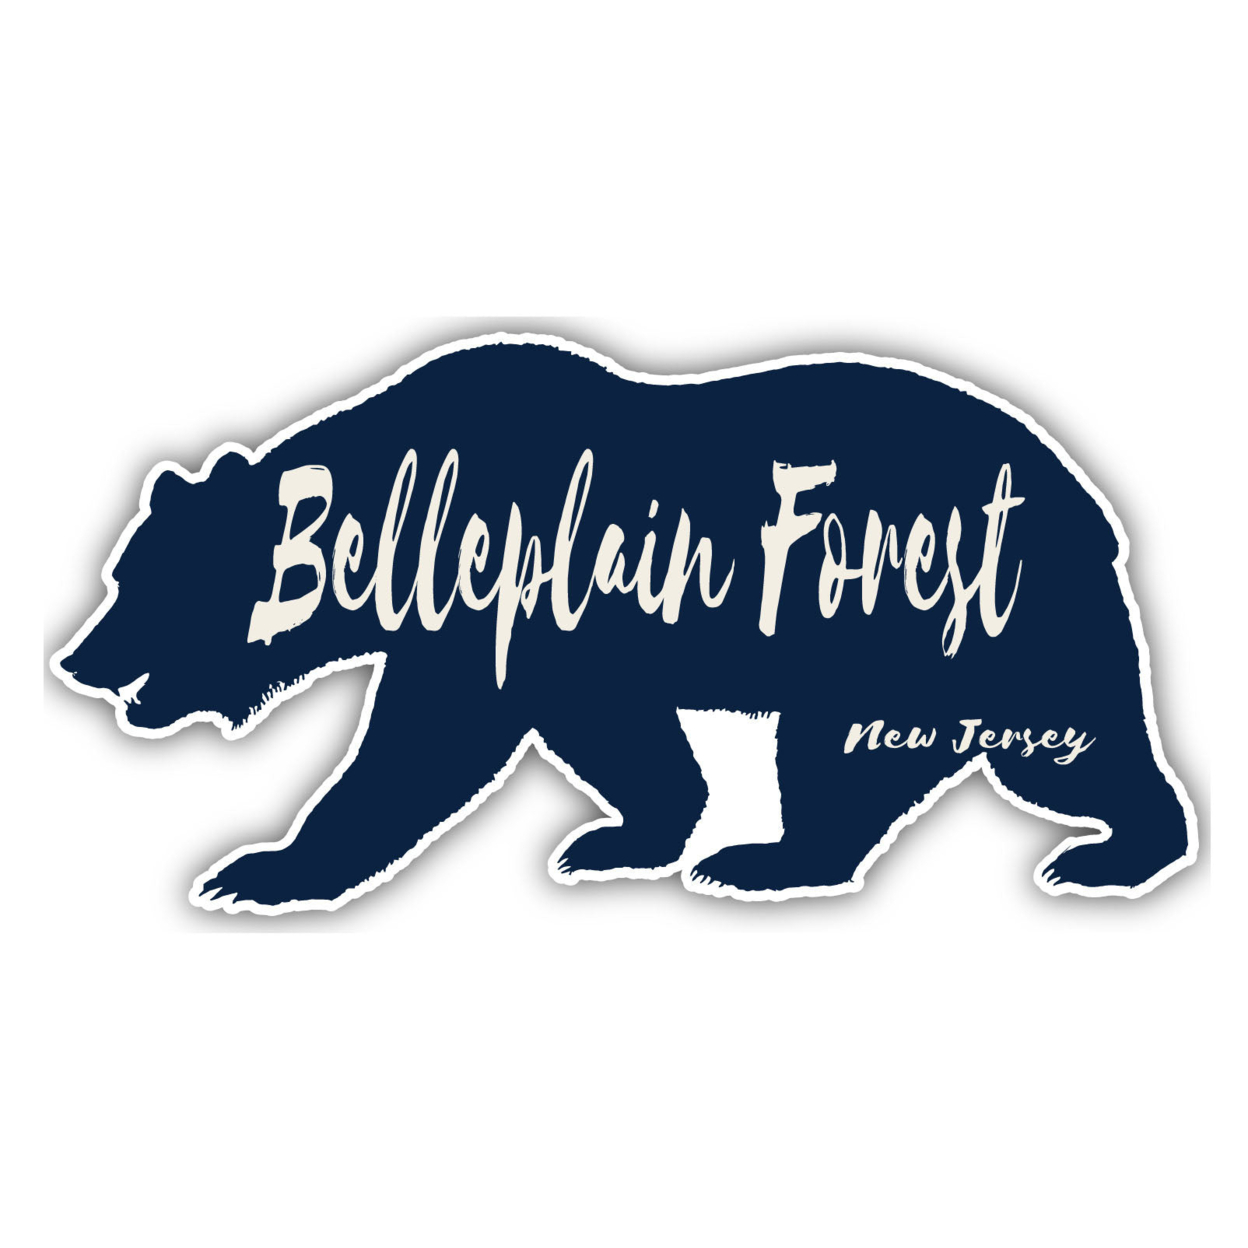 Belleplain Forest New Jersey Souvenir Decorative Stickers (Choose Theme And Size) - 4-Pack, 10-Inch, Bear